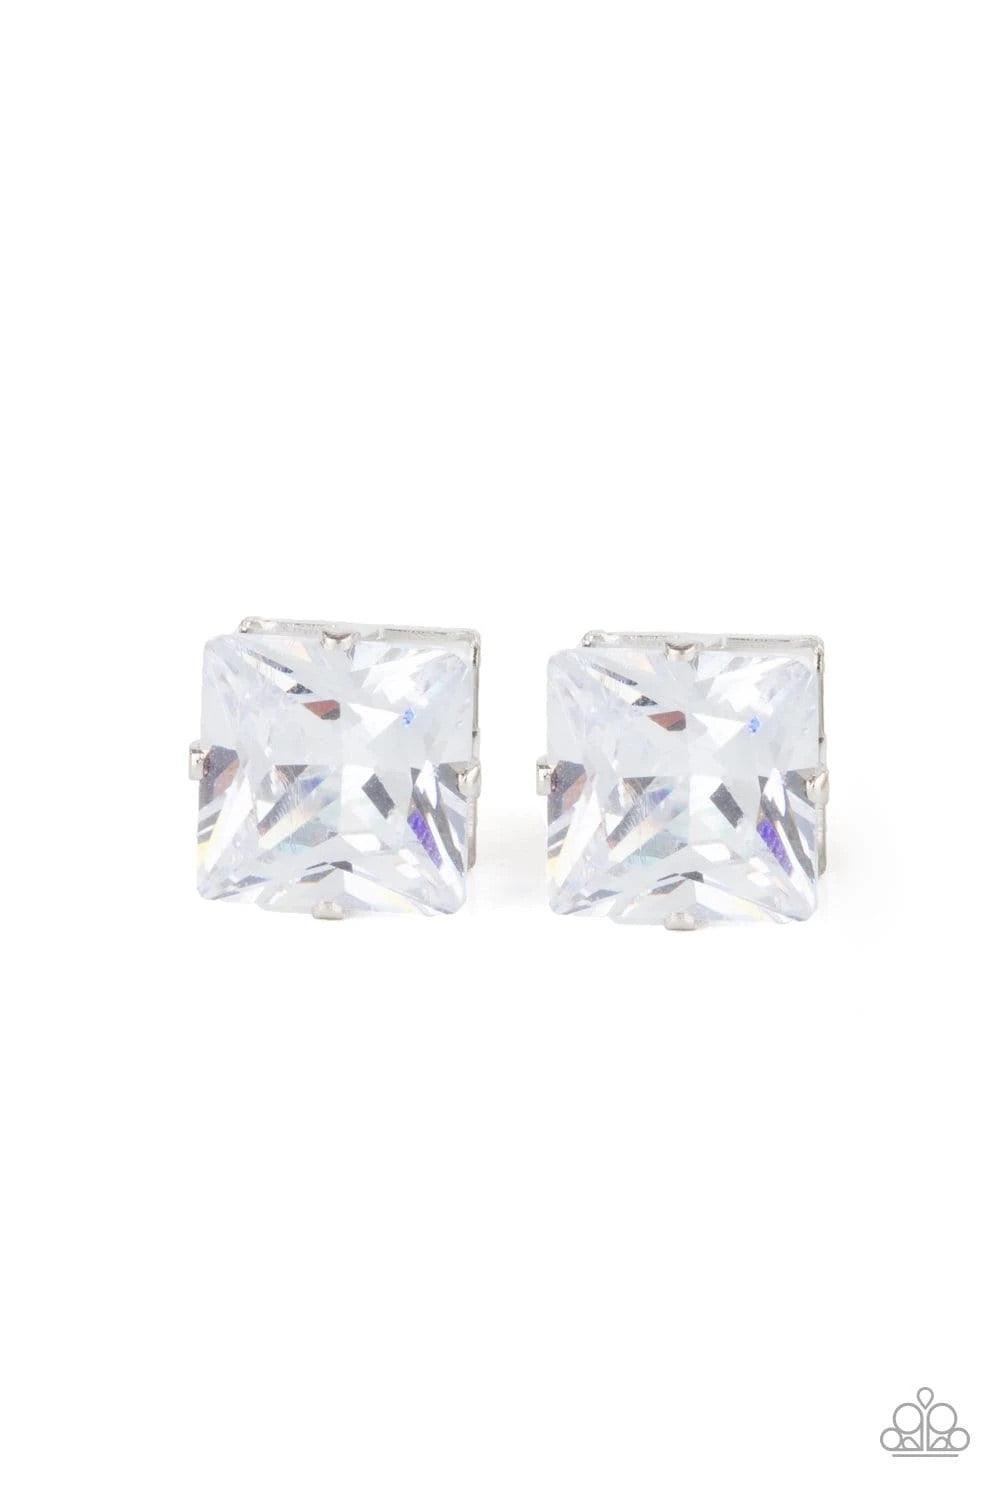 Paparazzi Accessories Times Square Timeless - White A stunning oversized square rhinestone, set in a classic silver pronged fitting, makes a show-stopping impact as it shines brilliantly and draws attention up to the face. Earring attaches to a standard p